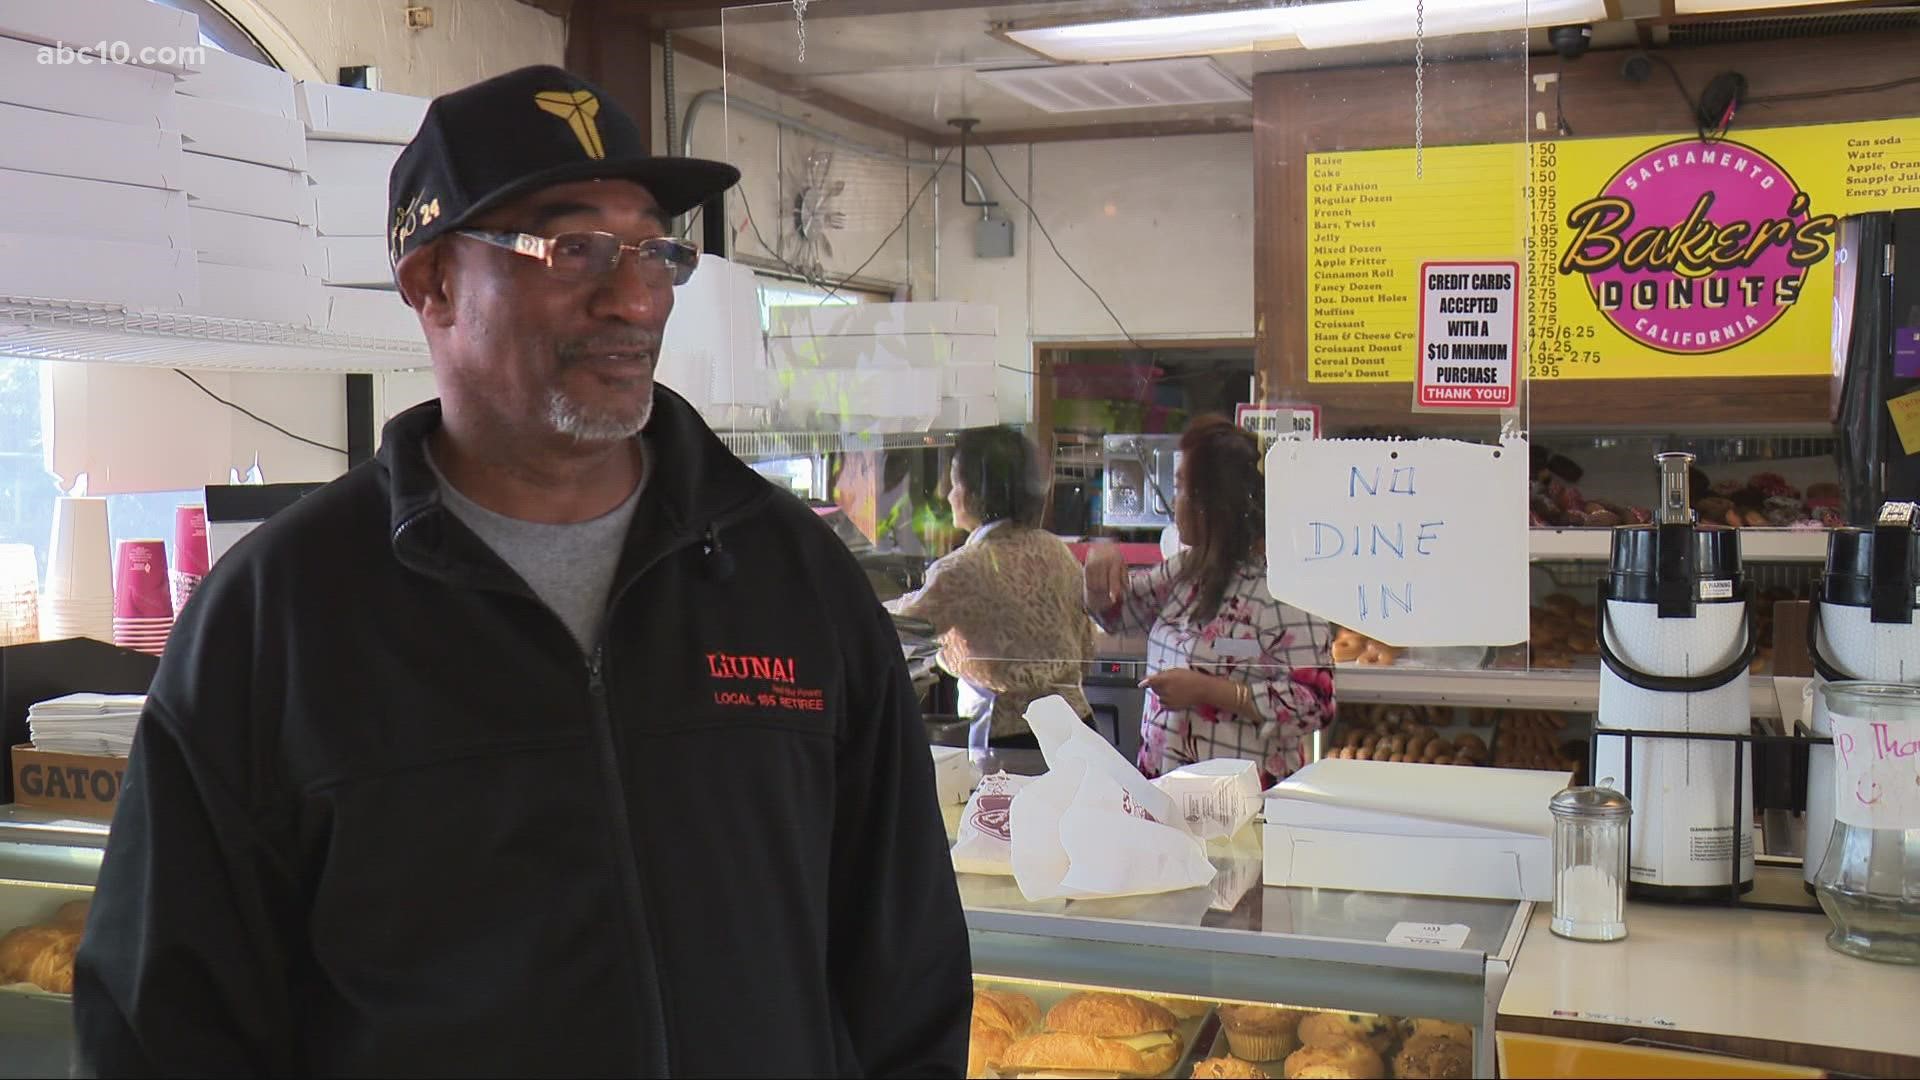 Our Lena Howland heads down to the donut shop to speak with the owners, and also chat with some customers who support Baker's Donuts.